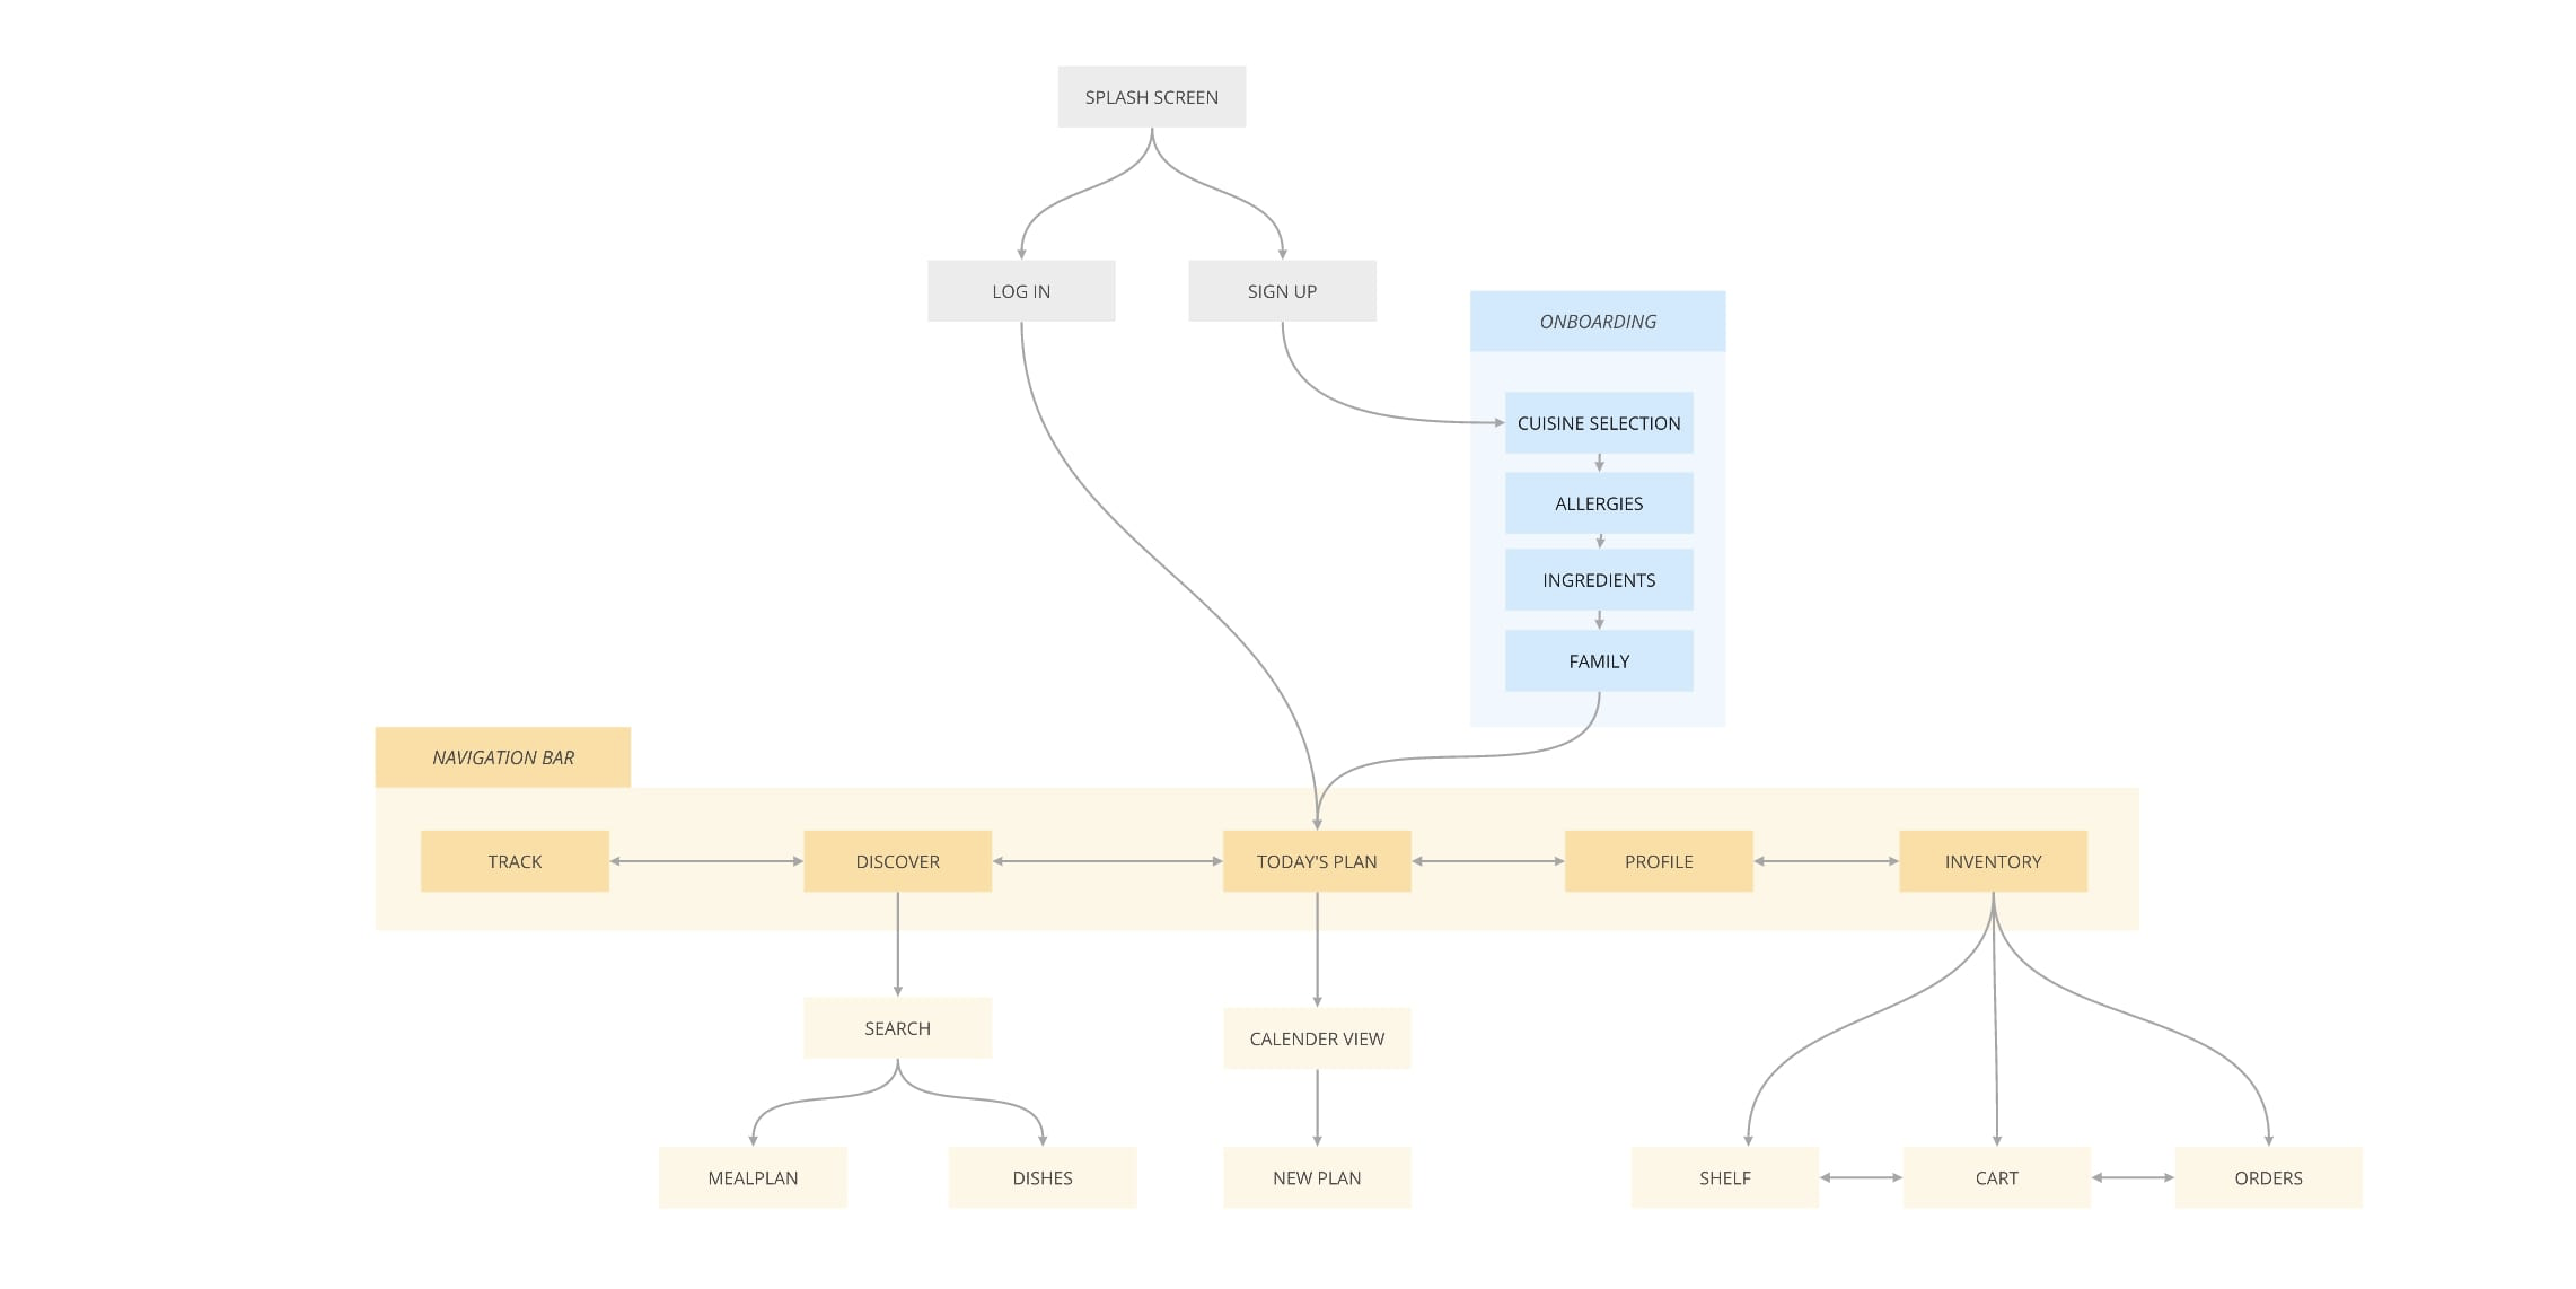 Information Architecture of the app